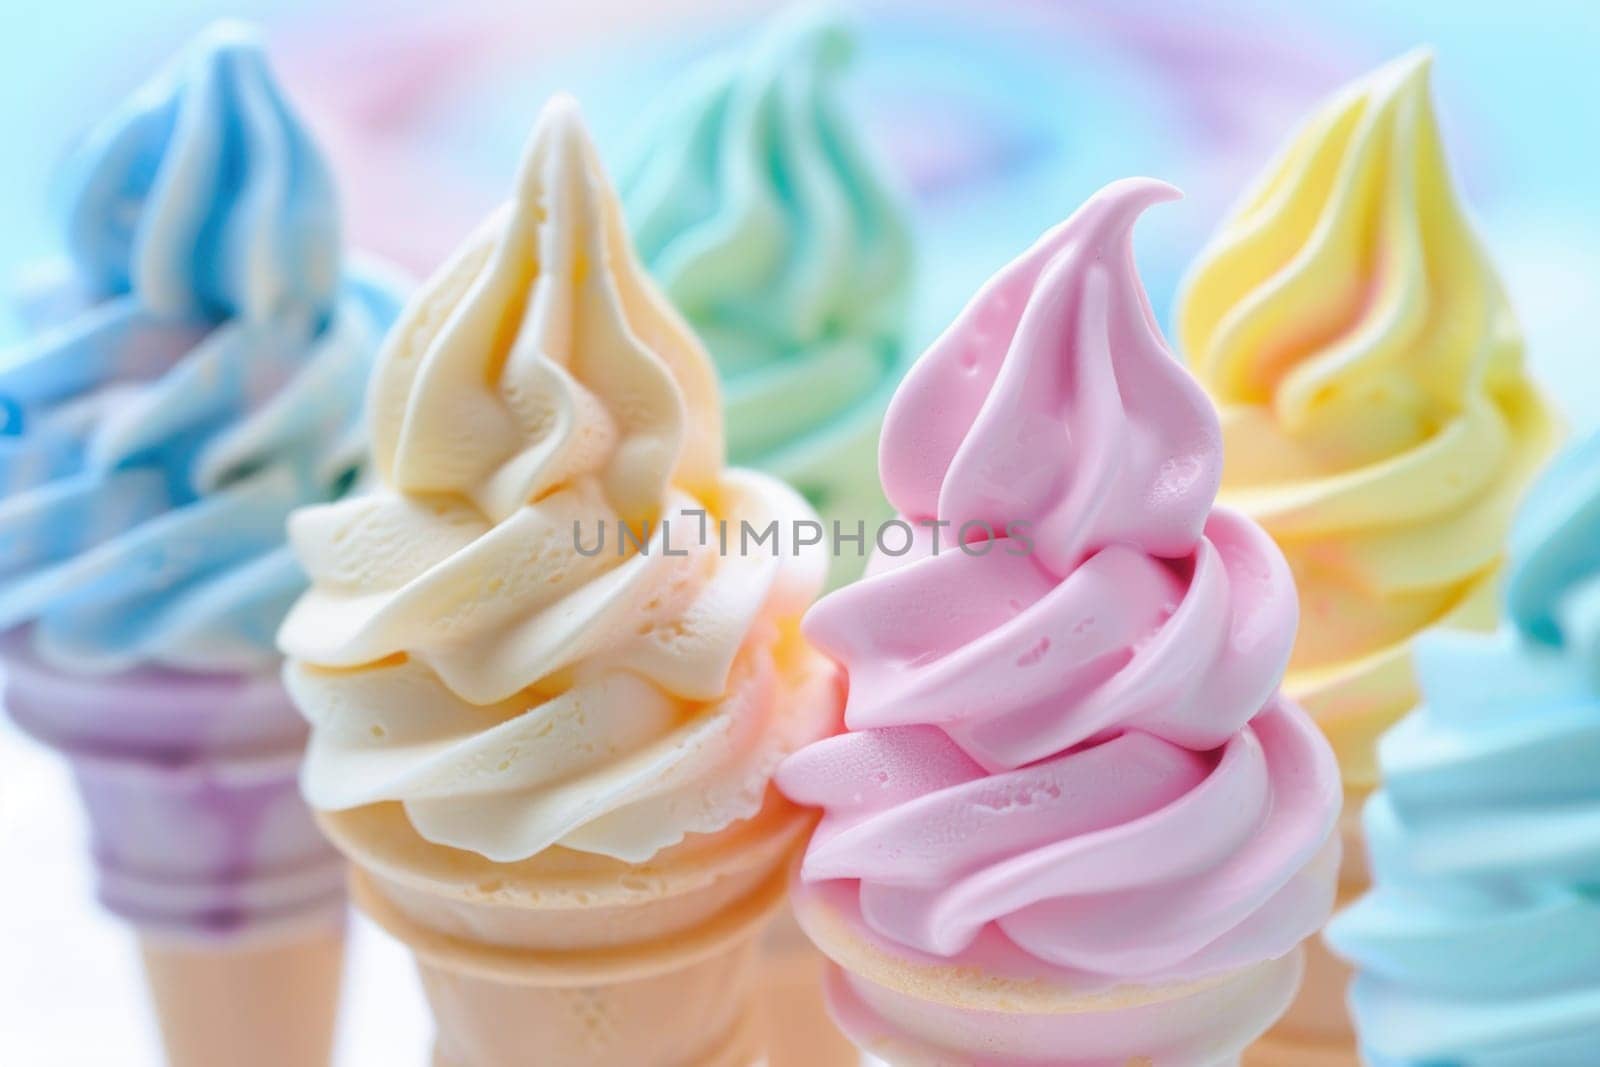 Cute Pastel Colored Ice Cream Concept Playful and Delightful Dessert Imagery.